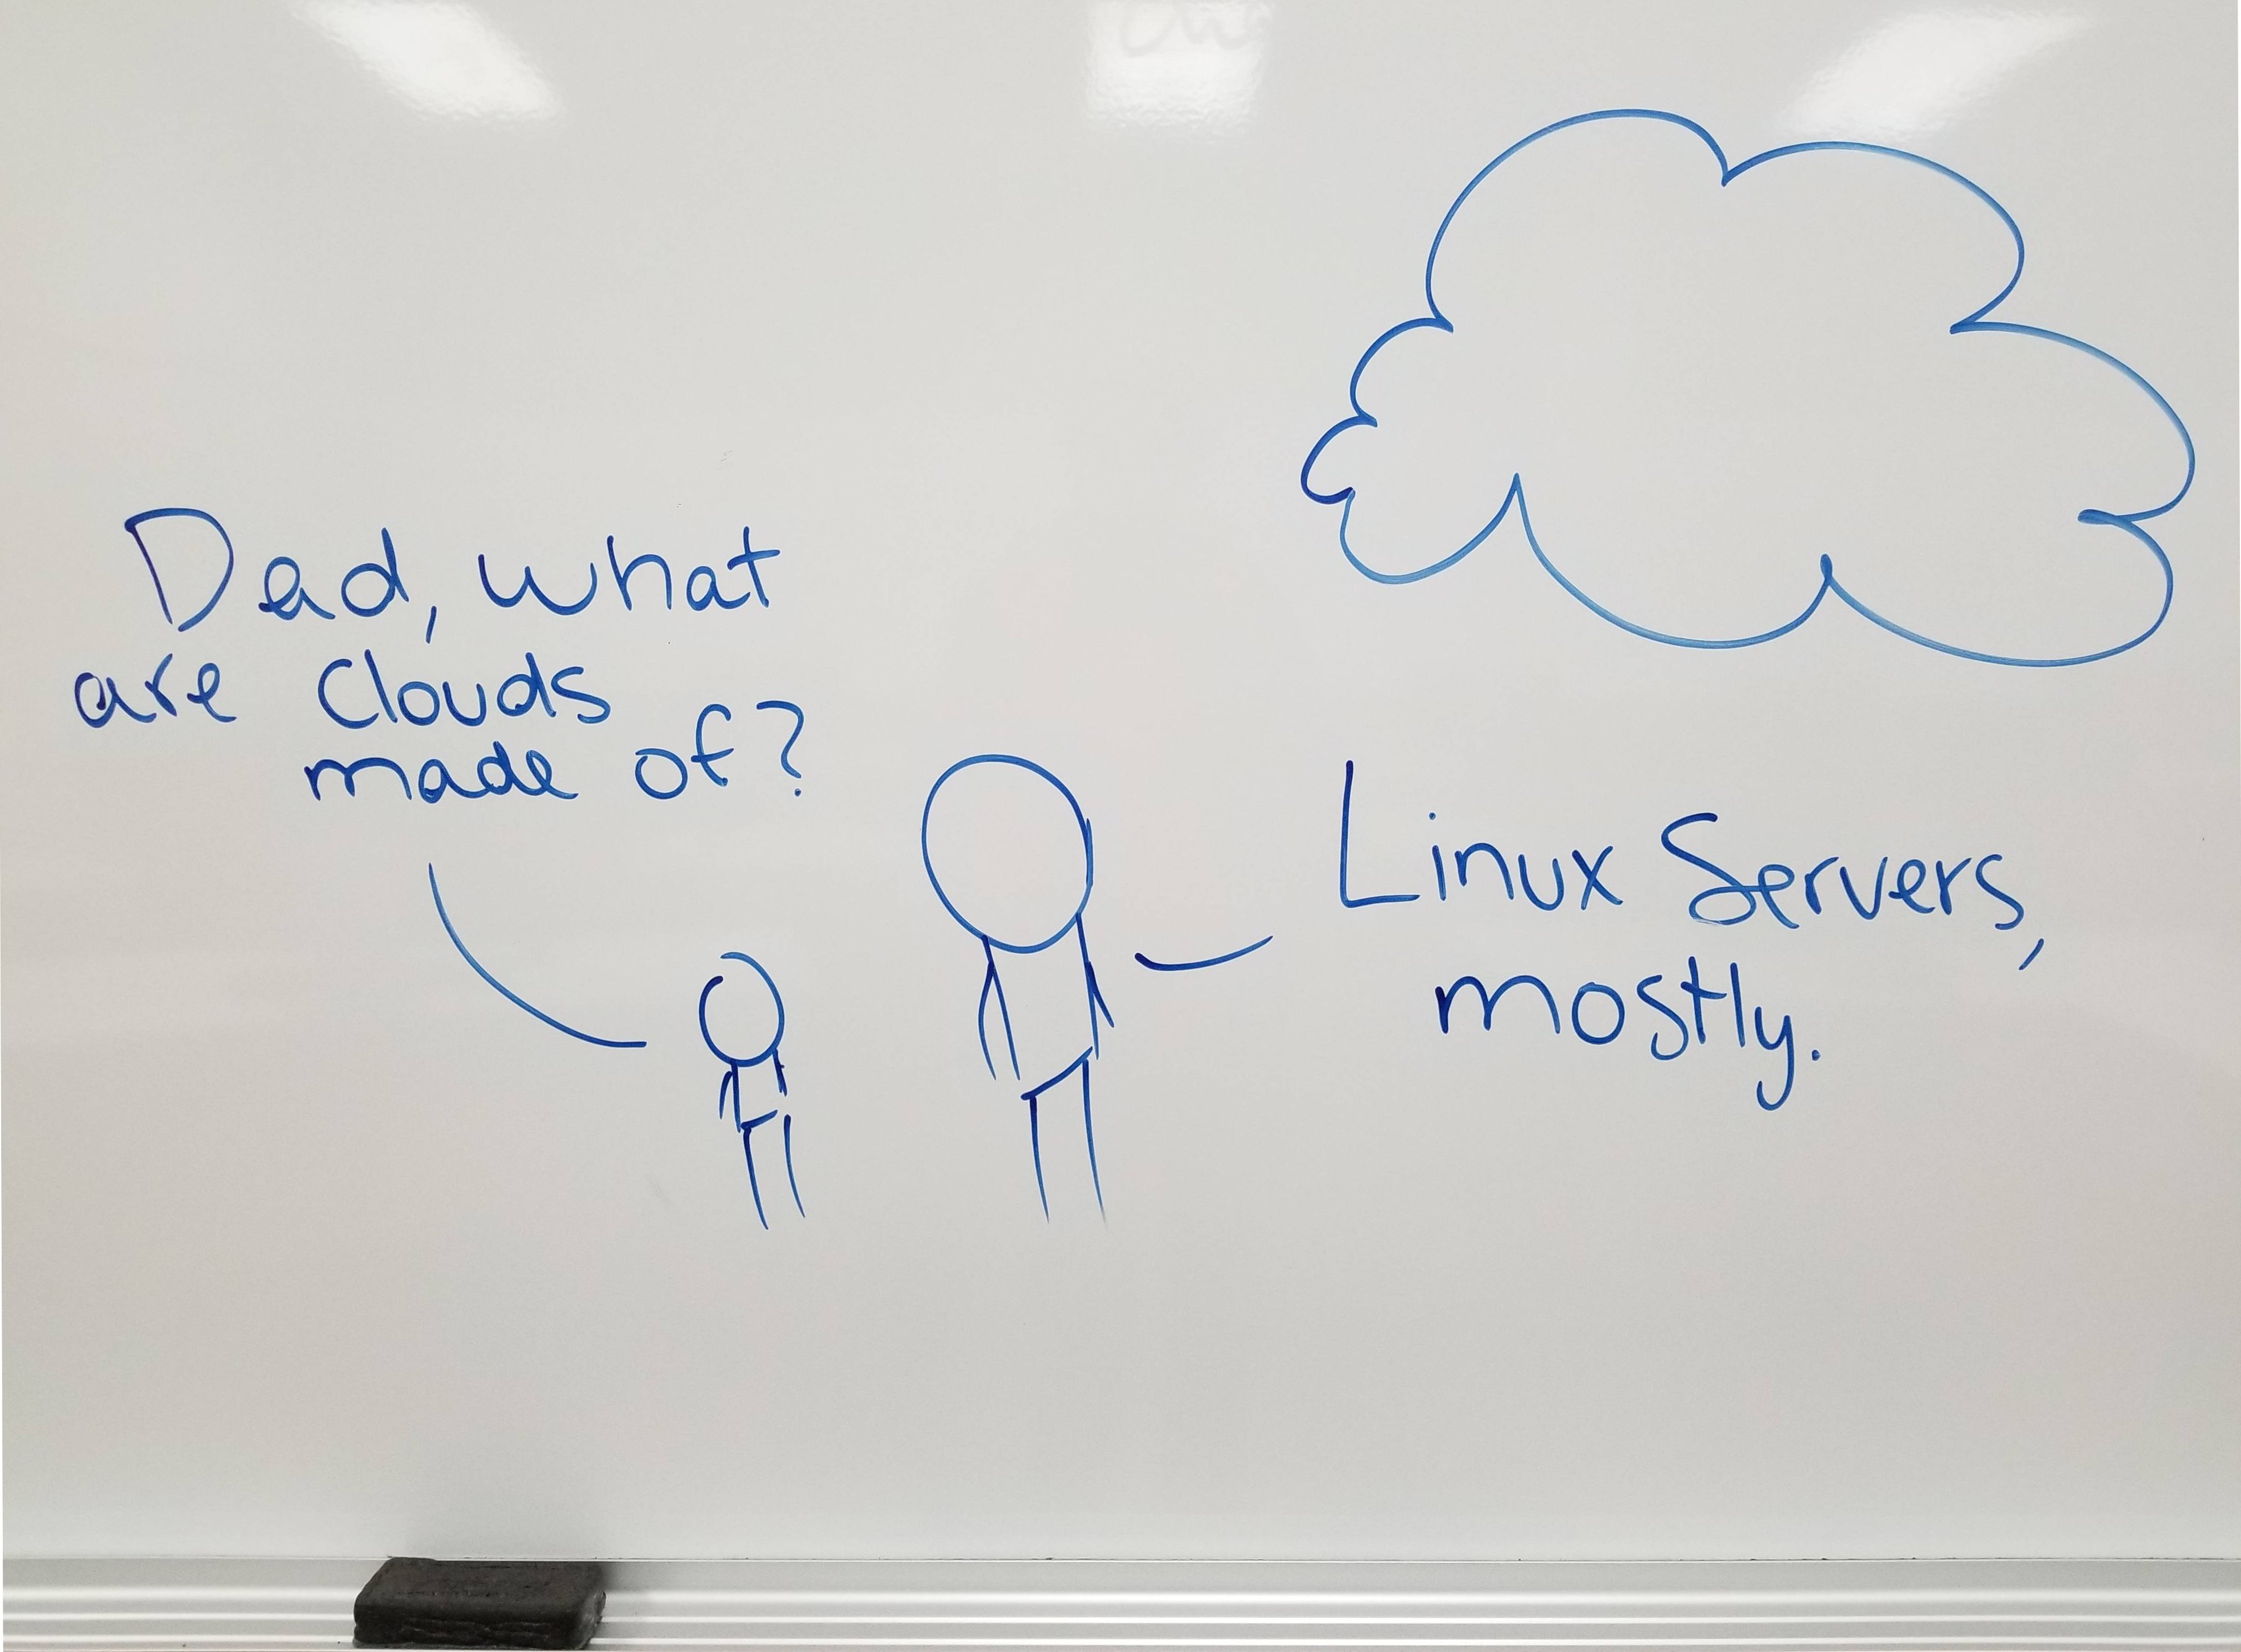 Comic with son asking father what clouds are made of and father responding 'linux servers, mostly'